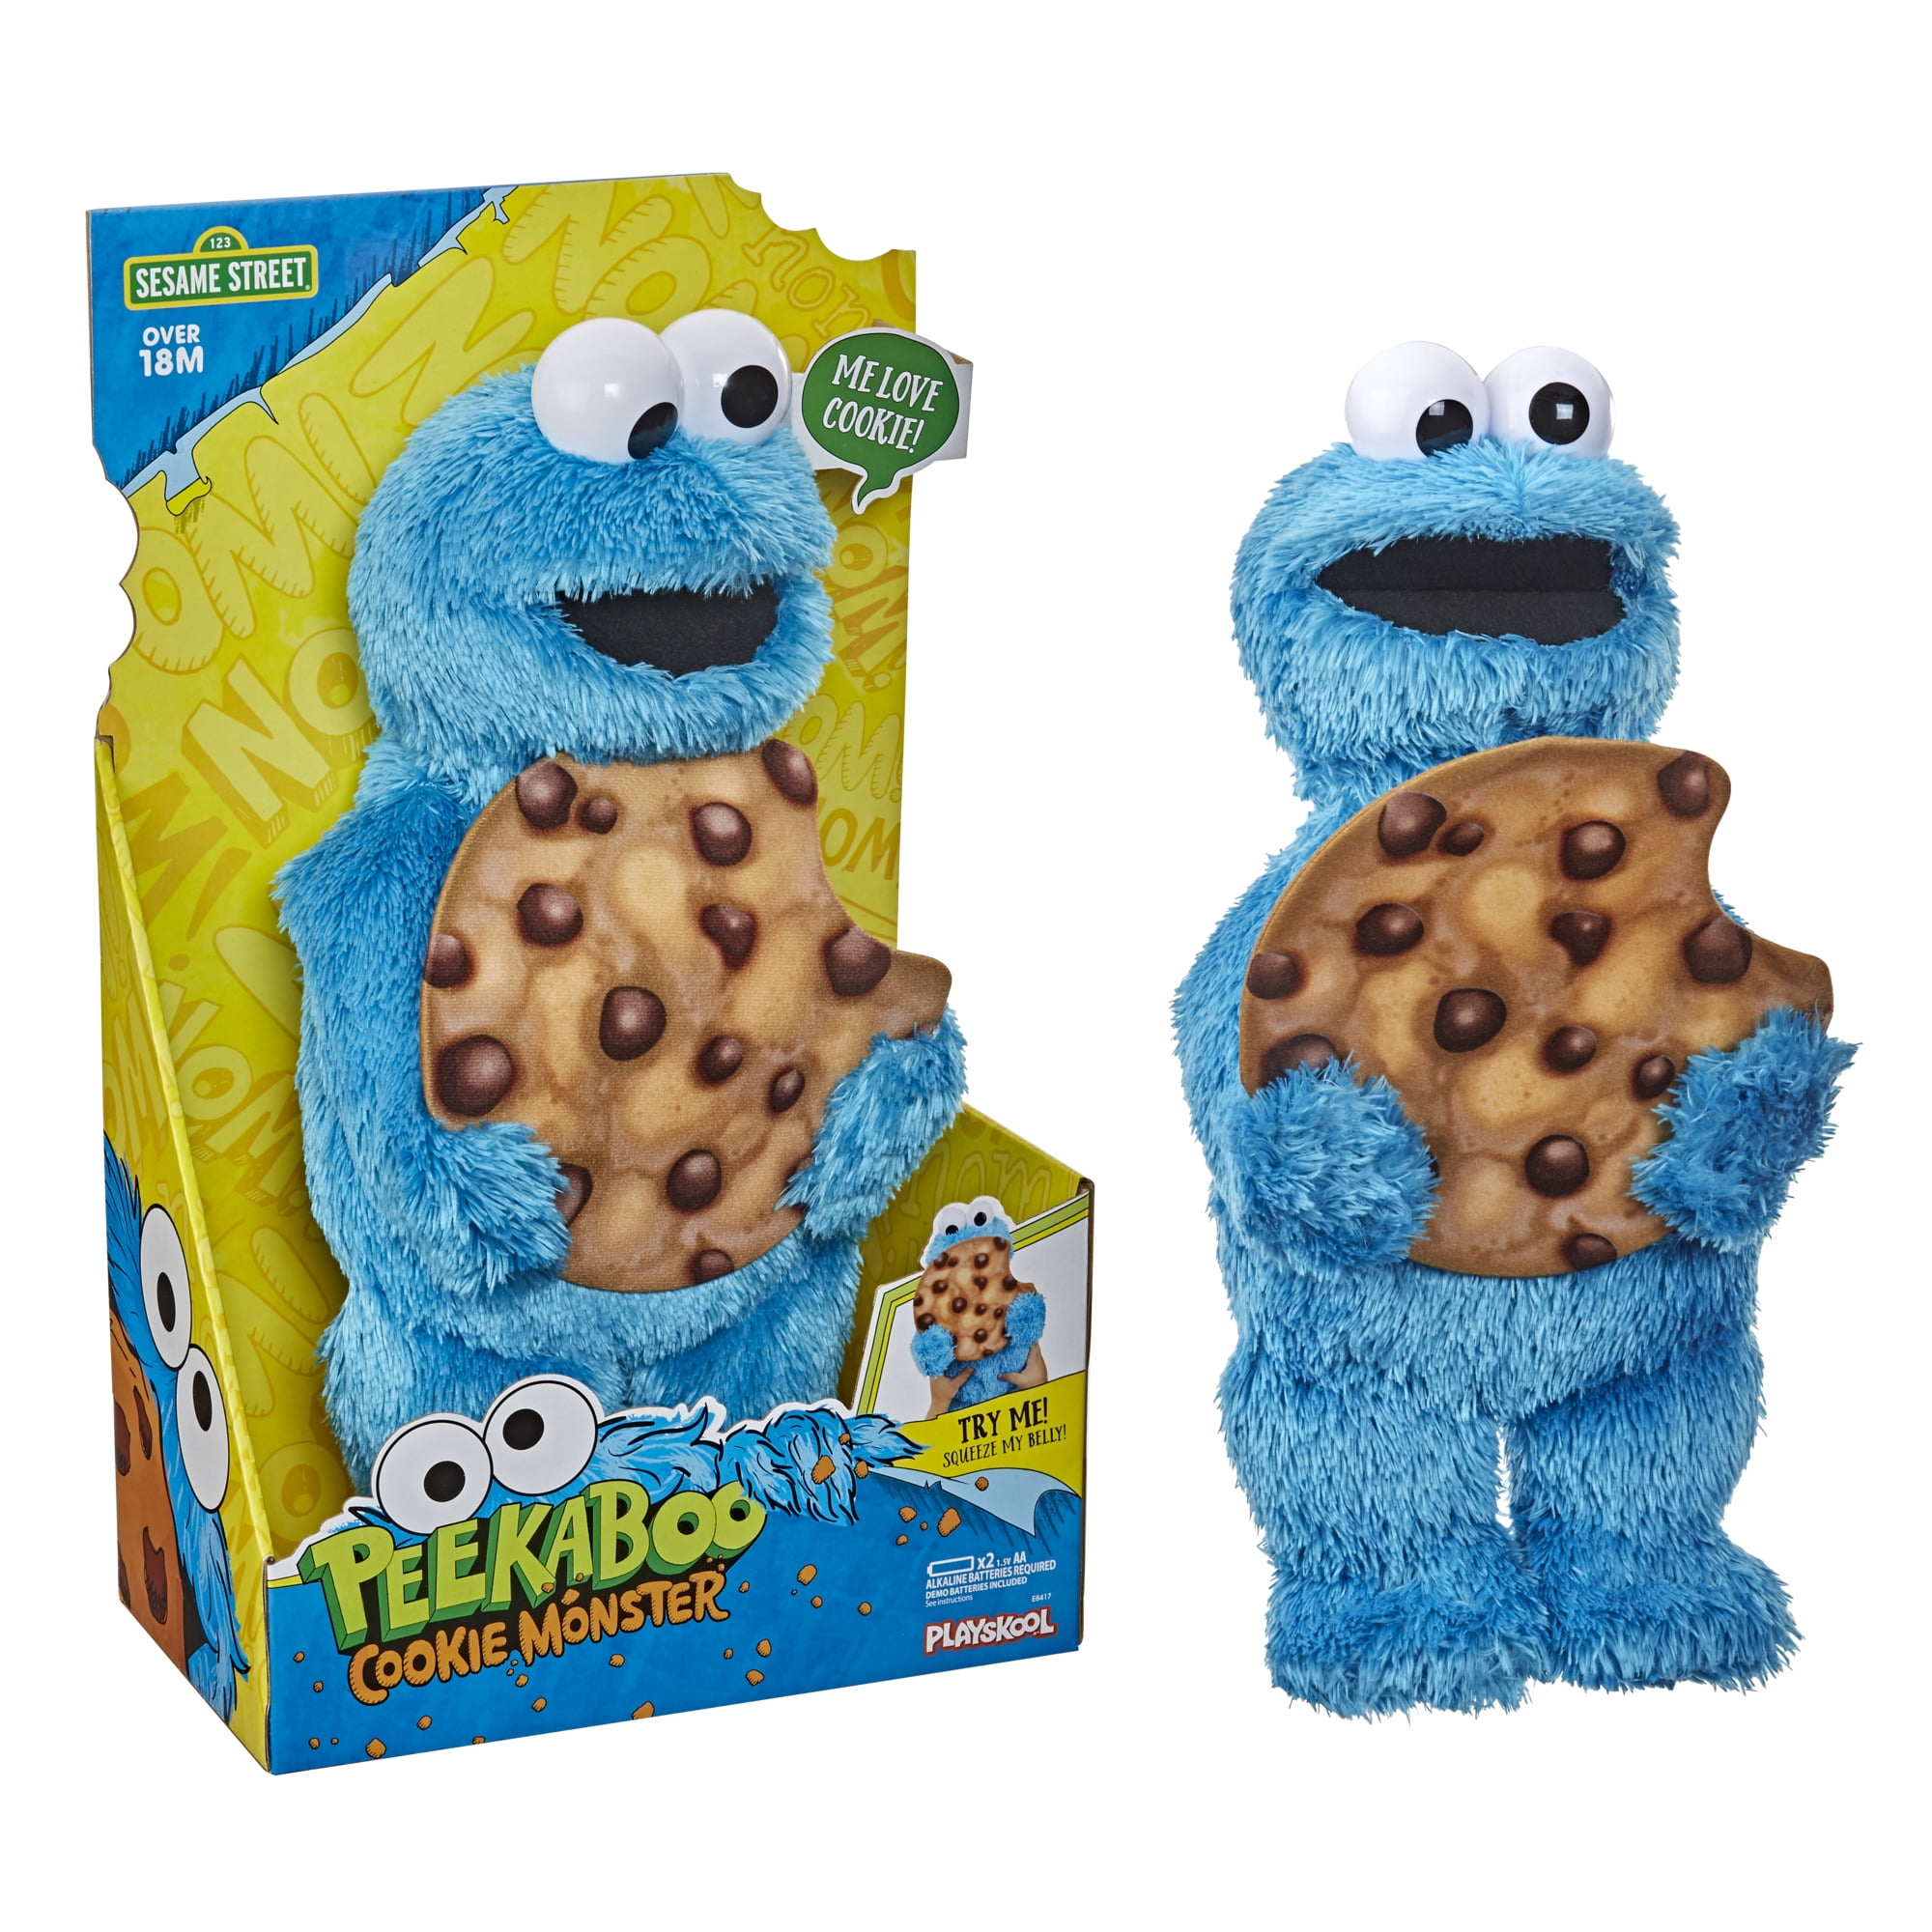 Sesame Street Peekaboo Cookie Monster, 13 Inch Plush Toy, for 18 Months ...